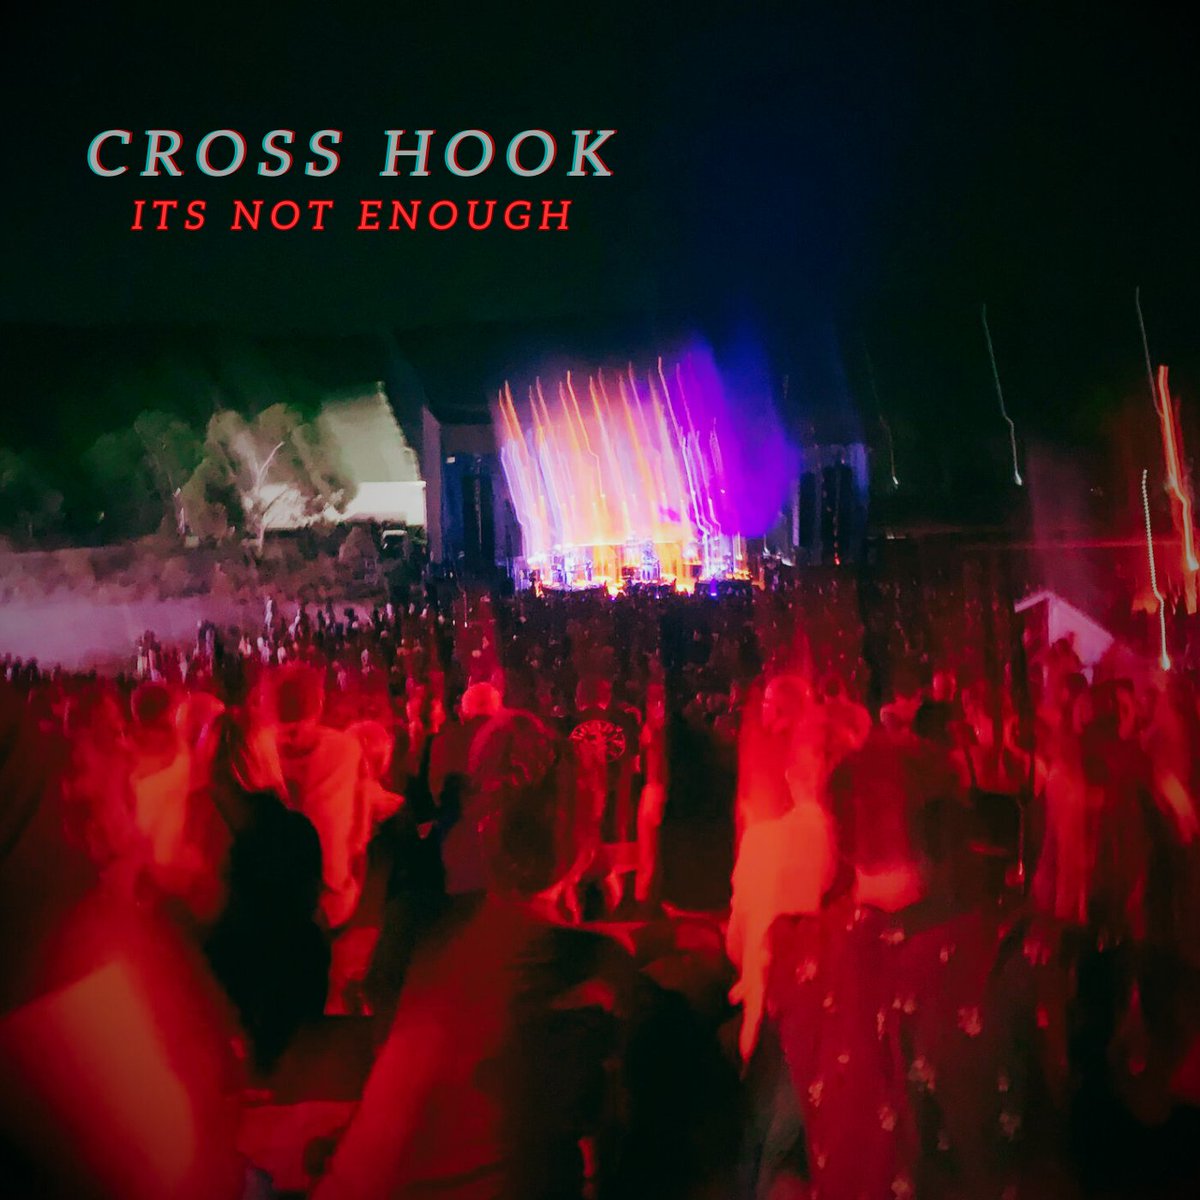 NEW SINGLE 'It's Not Enough' coming out this coming Thursday the 22nd of June on all your streaming services. Official Music video dropping on Youtube the same day!! #synthfam #synthpop #itsnotenough #crosshookband #synth #80smusic #newmusic #newrelease #music #IndieArtists